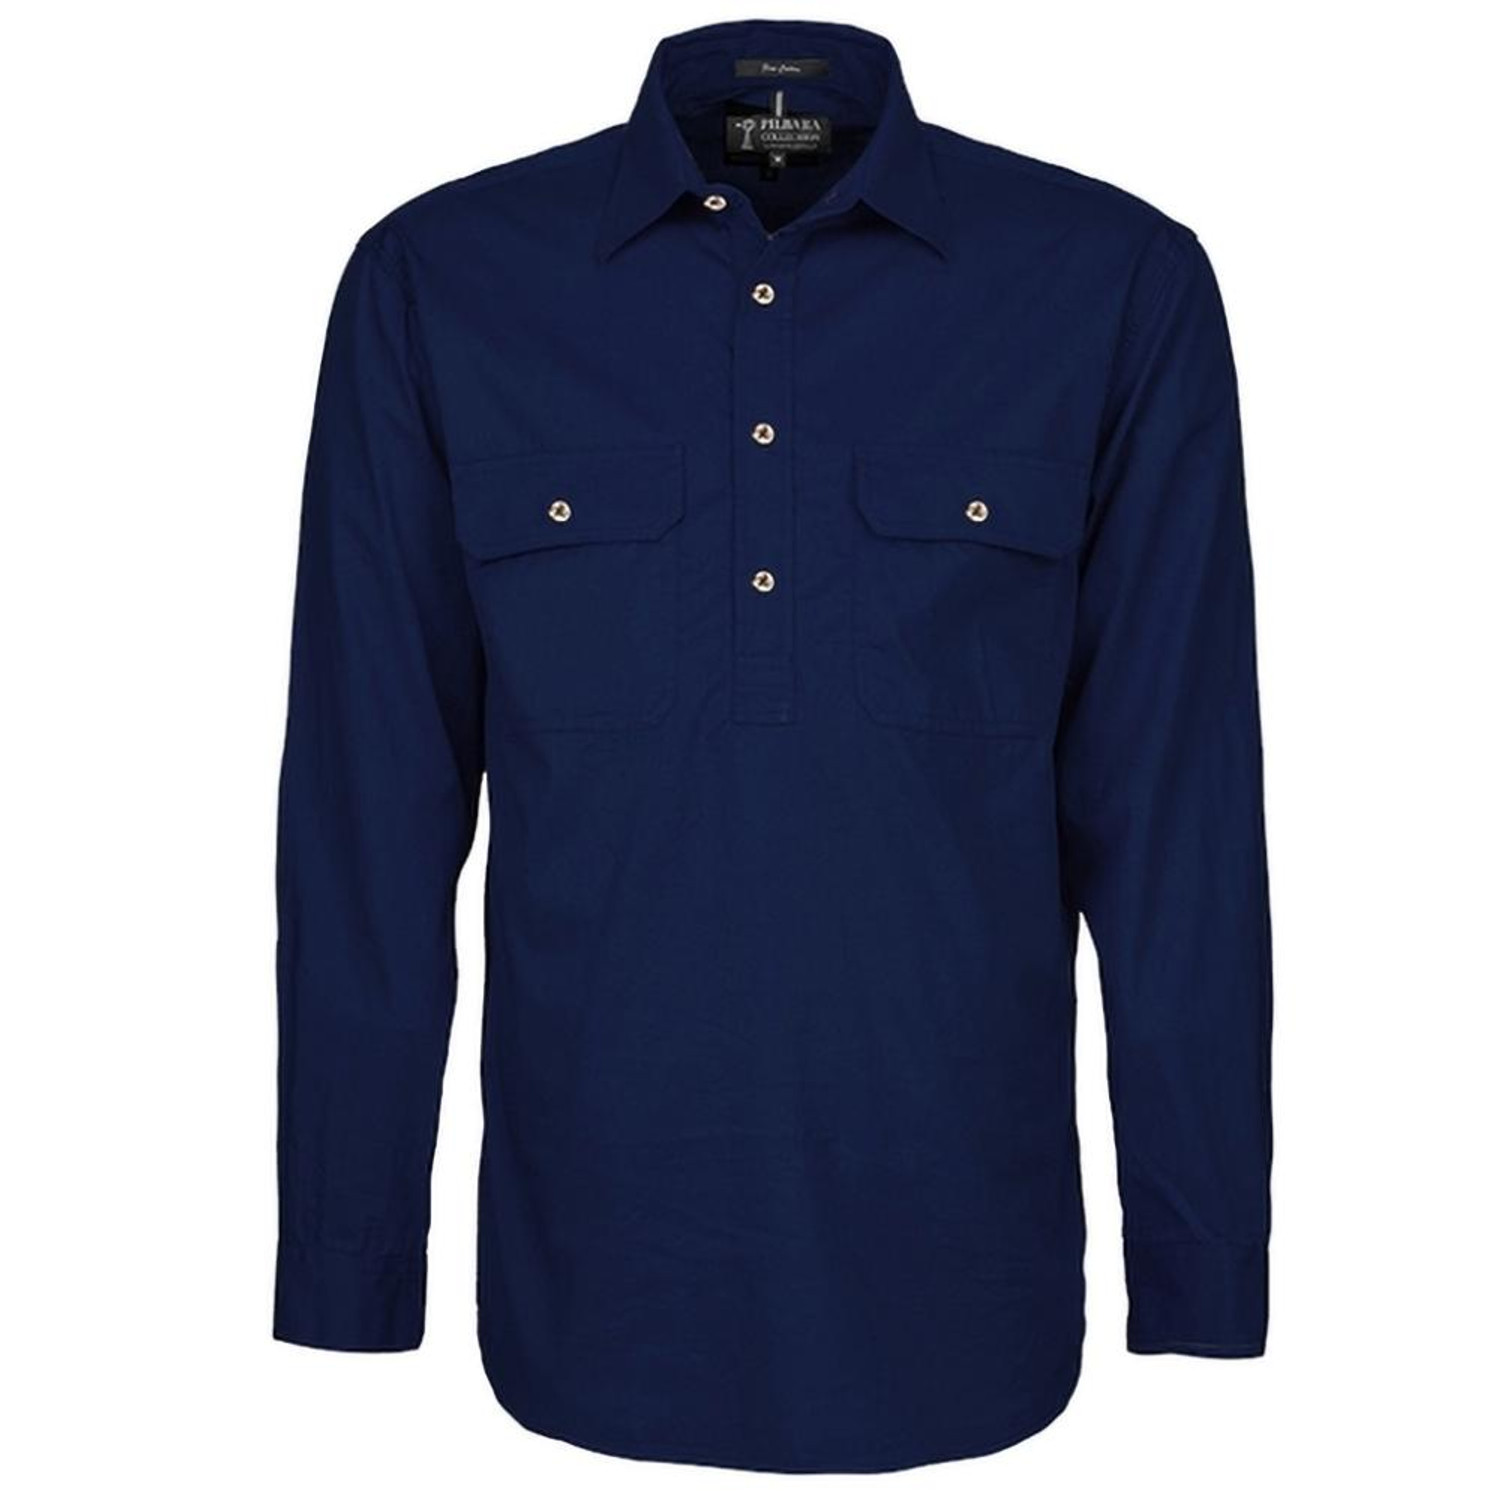 FREE EMBROIDERY - Mens French Navy CLOSED FRONT Shirt buy 20